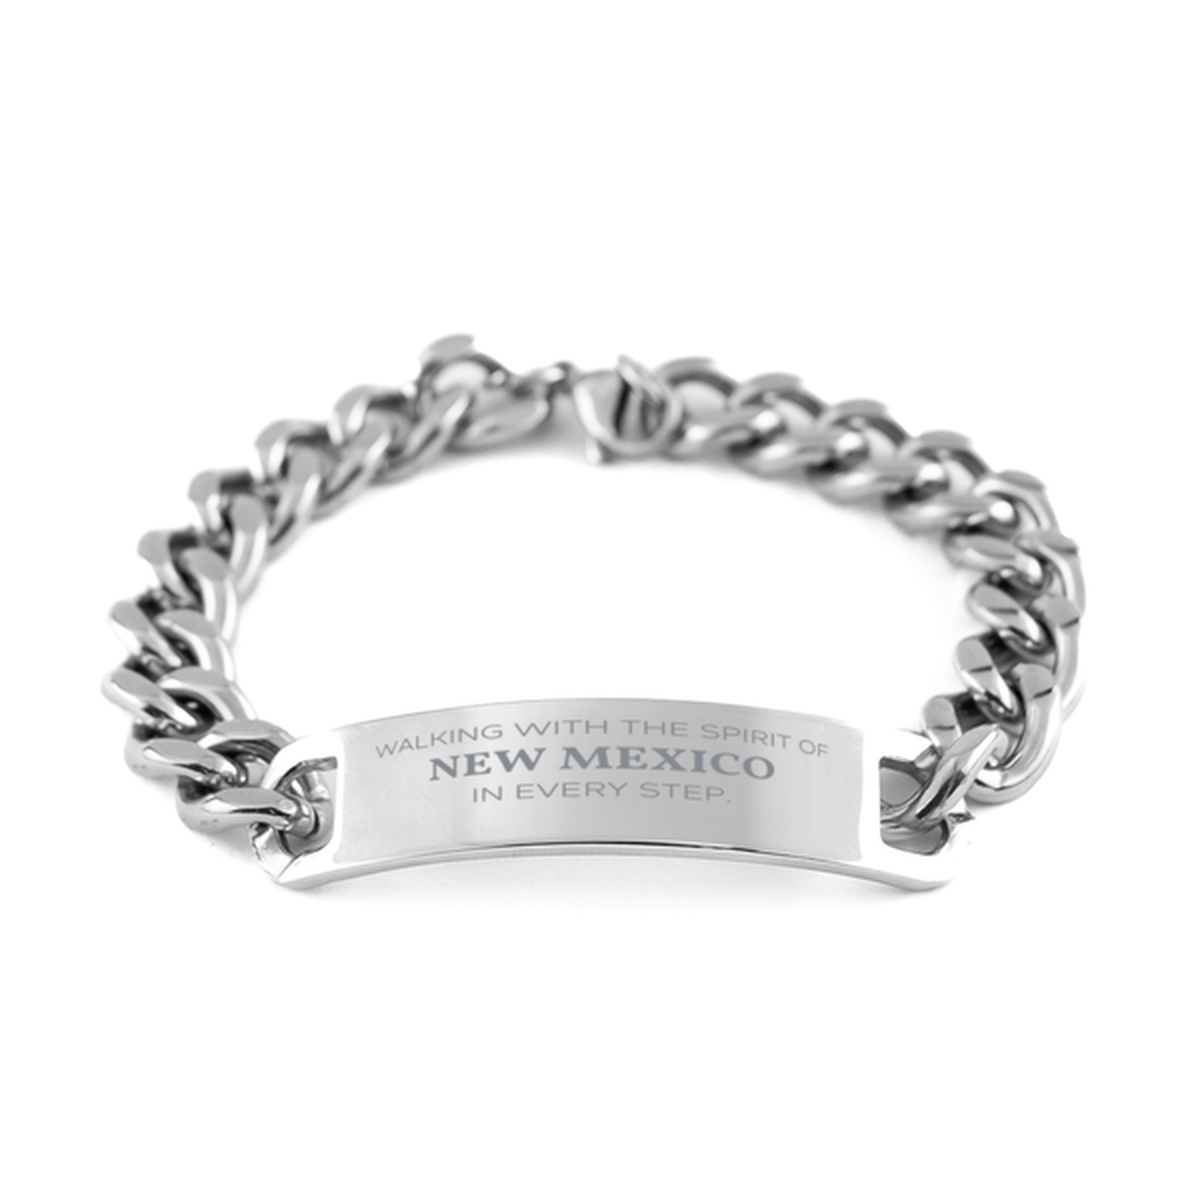 New Mexico Gifts, Walking with the spirit, Love New Mexico Birthday Christmas Cuban Chain Stainless Steel Bracelet For New Mexico People, Men, Women, Friends